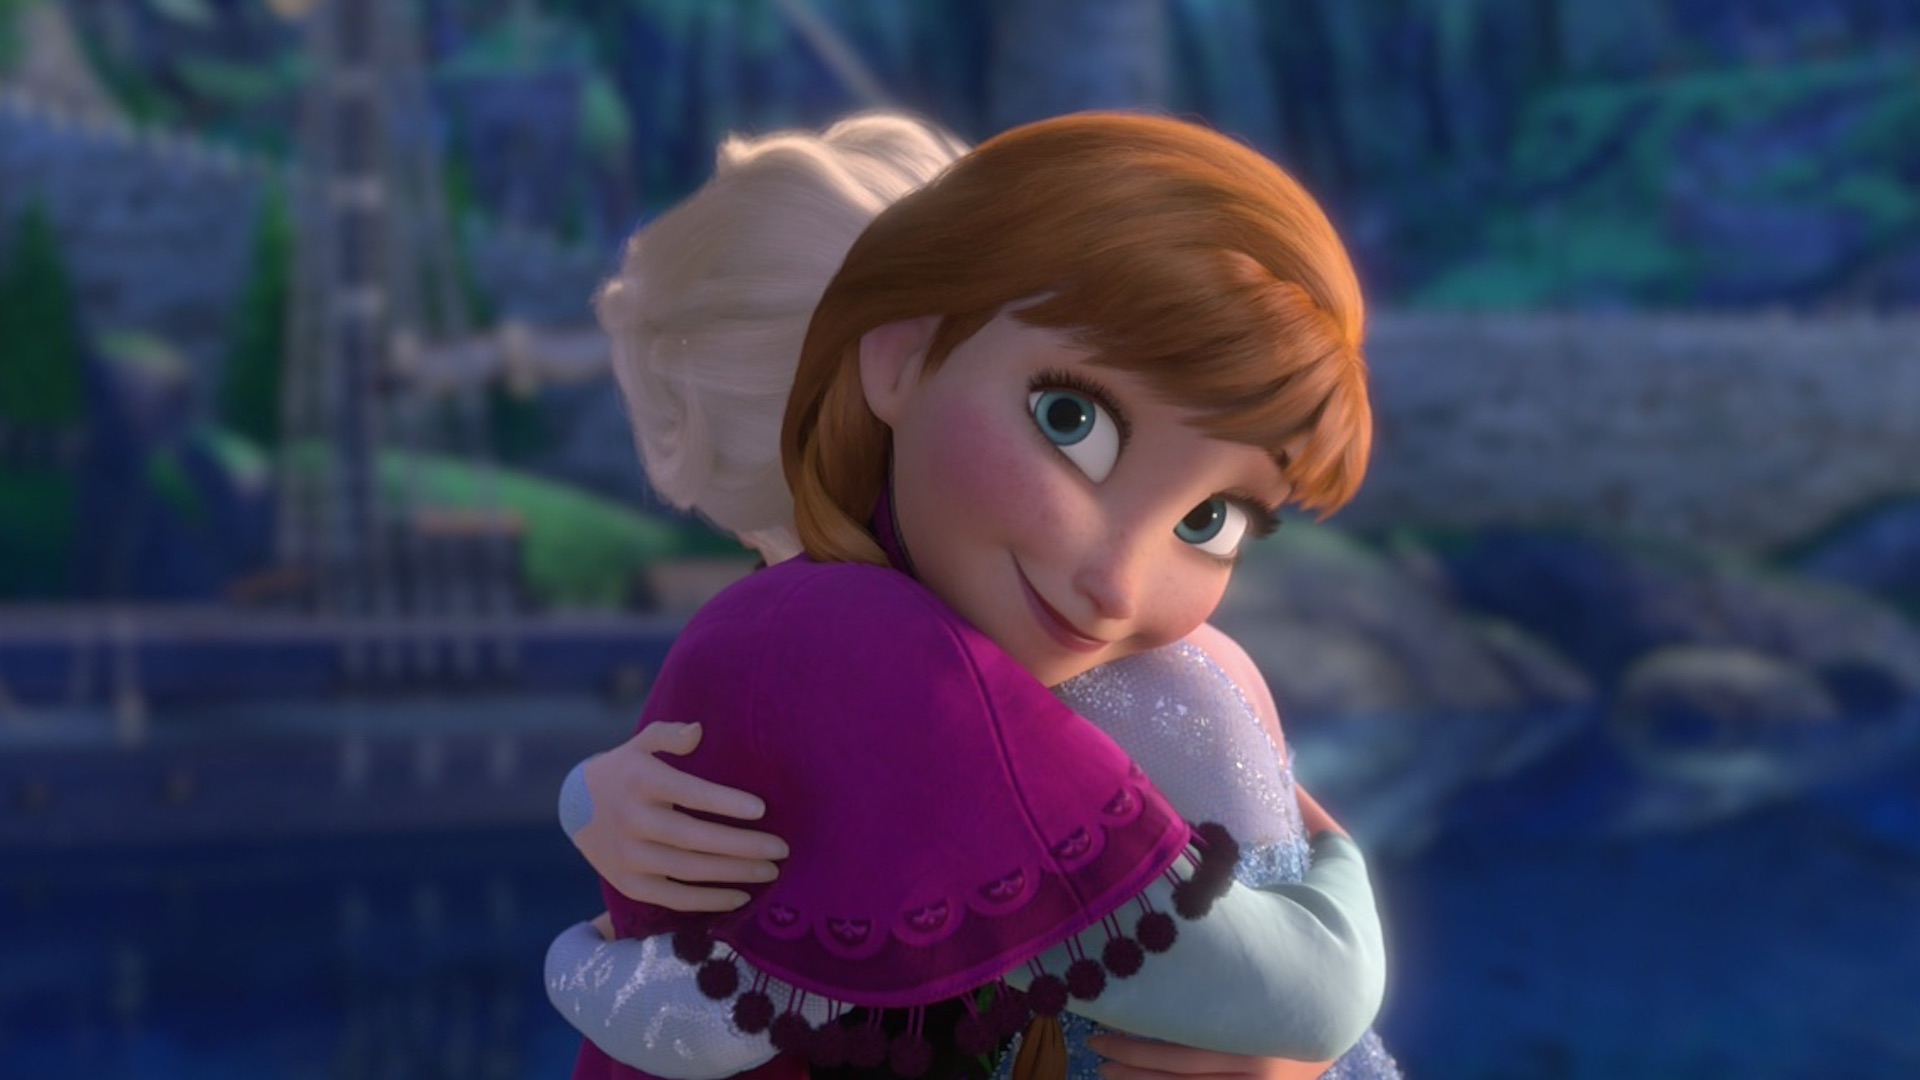 The two sisters in Frozen